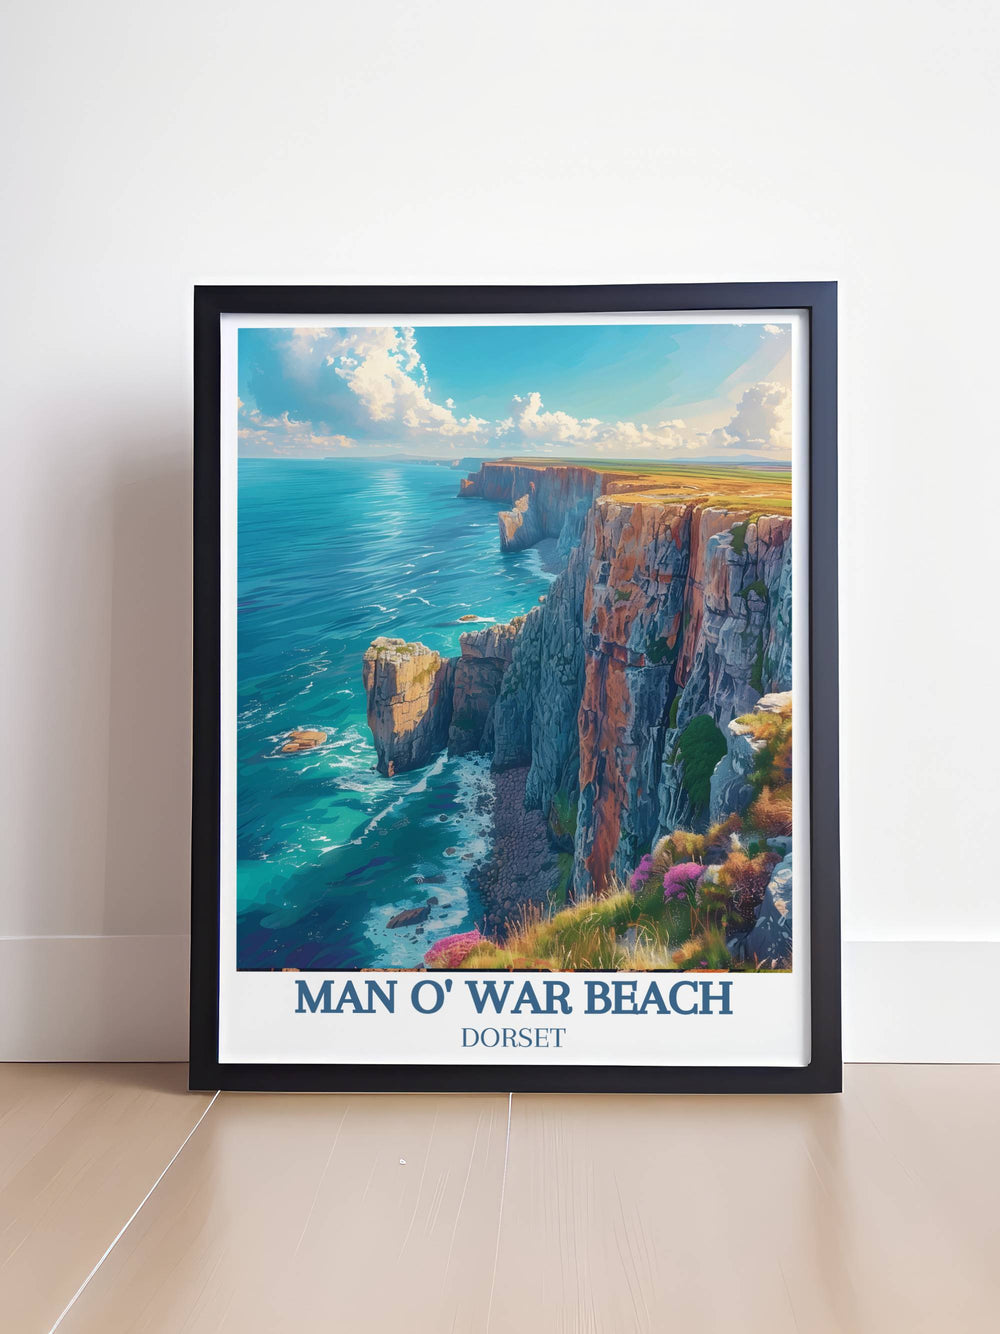 Majestic view of Durdle Door Arch and Jurassic Park Cliffs on the Jurassic Coast of Dorset perfect for Dorset posters prints and wall art bringing the natural wonder of these iconic landmarks into your home as beautiful and timeless pieces of artwork and photography.